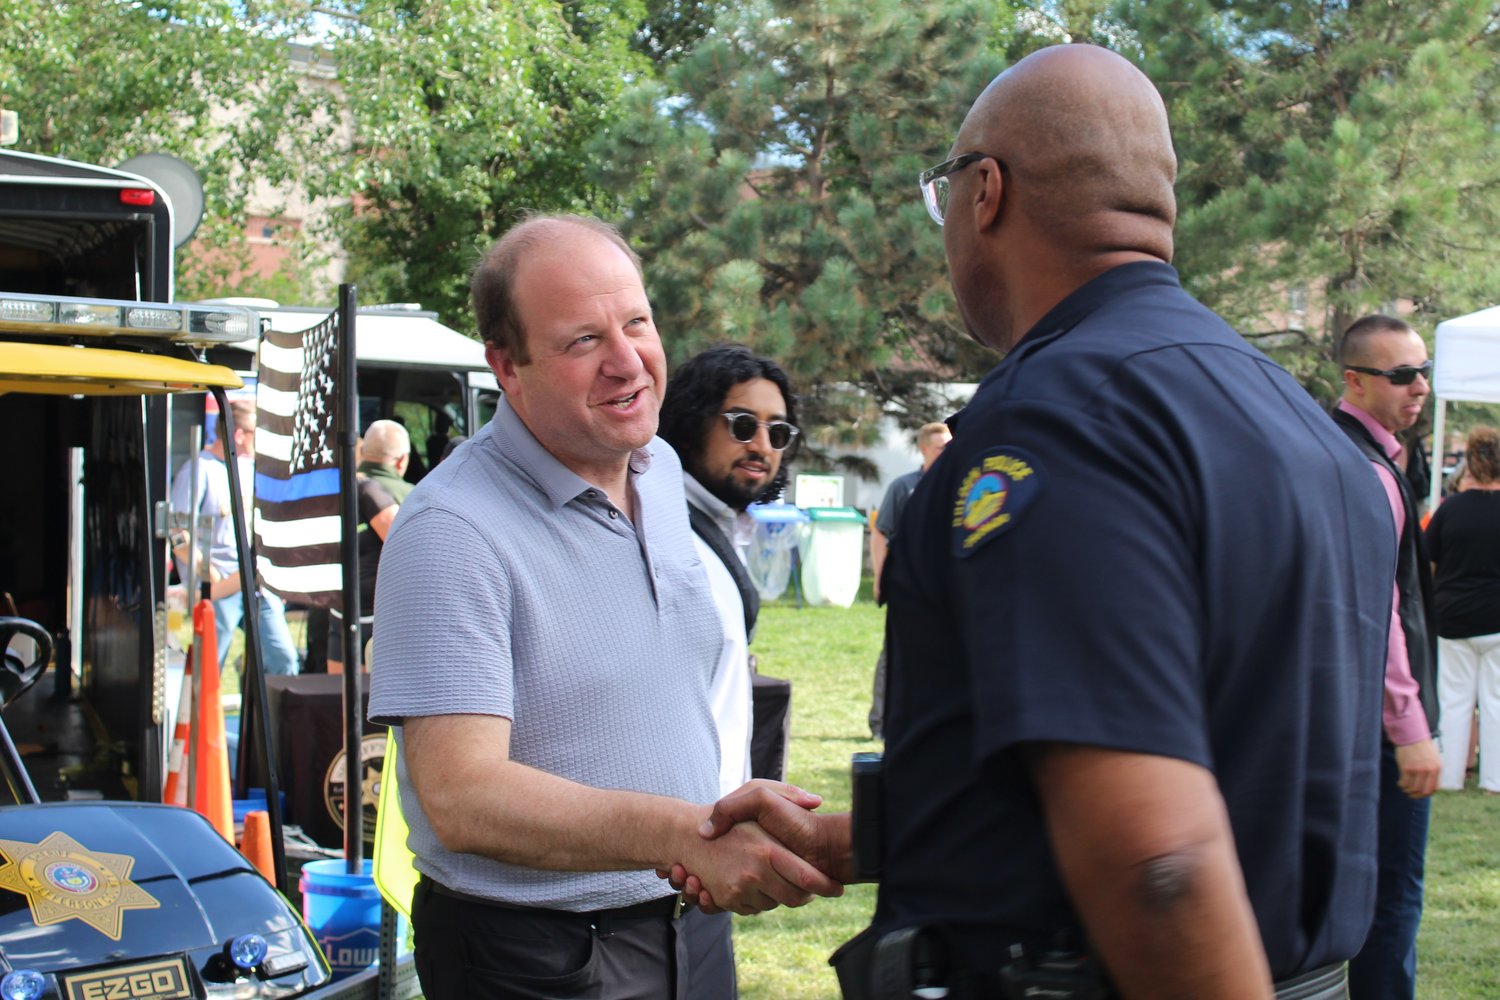 Colorado Gov. Jared Polis, left, shakes hands with Marcus Williams, Golden Police Department's commander of operations, during the city's 20th annual National Night Out event Aug. 2 at Parfet Park.